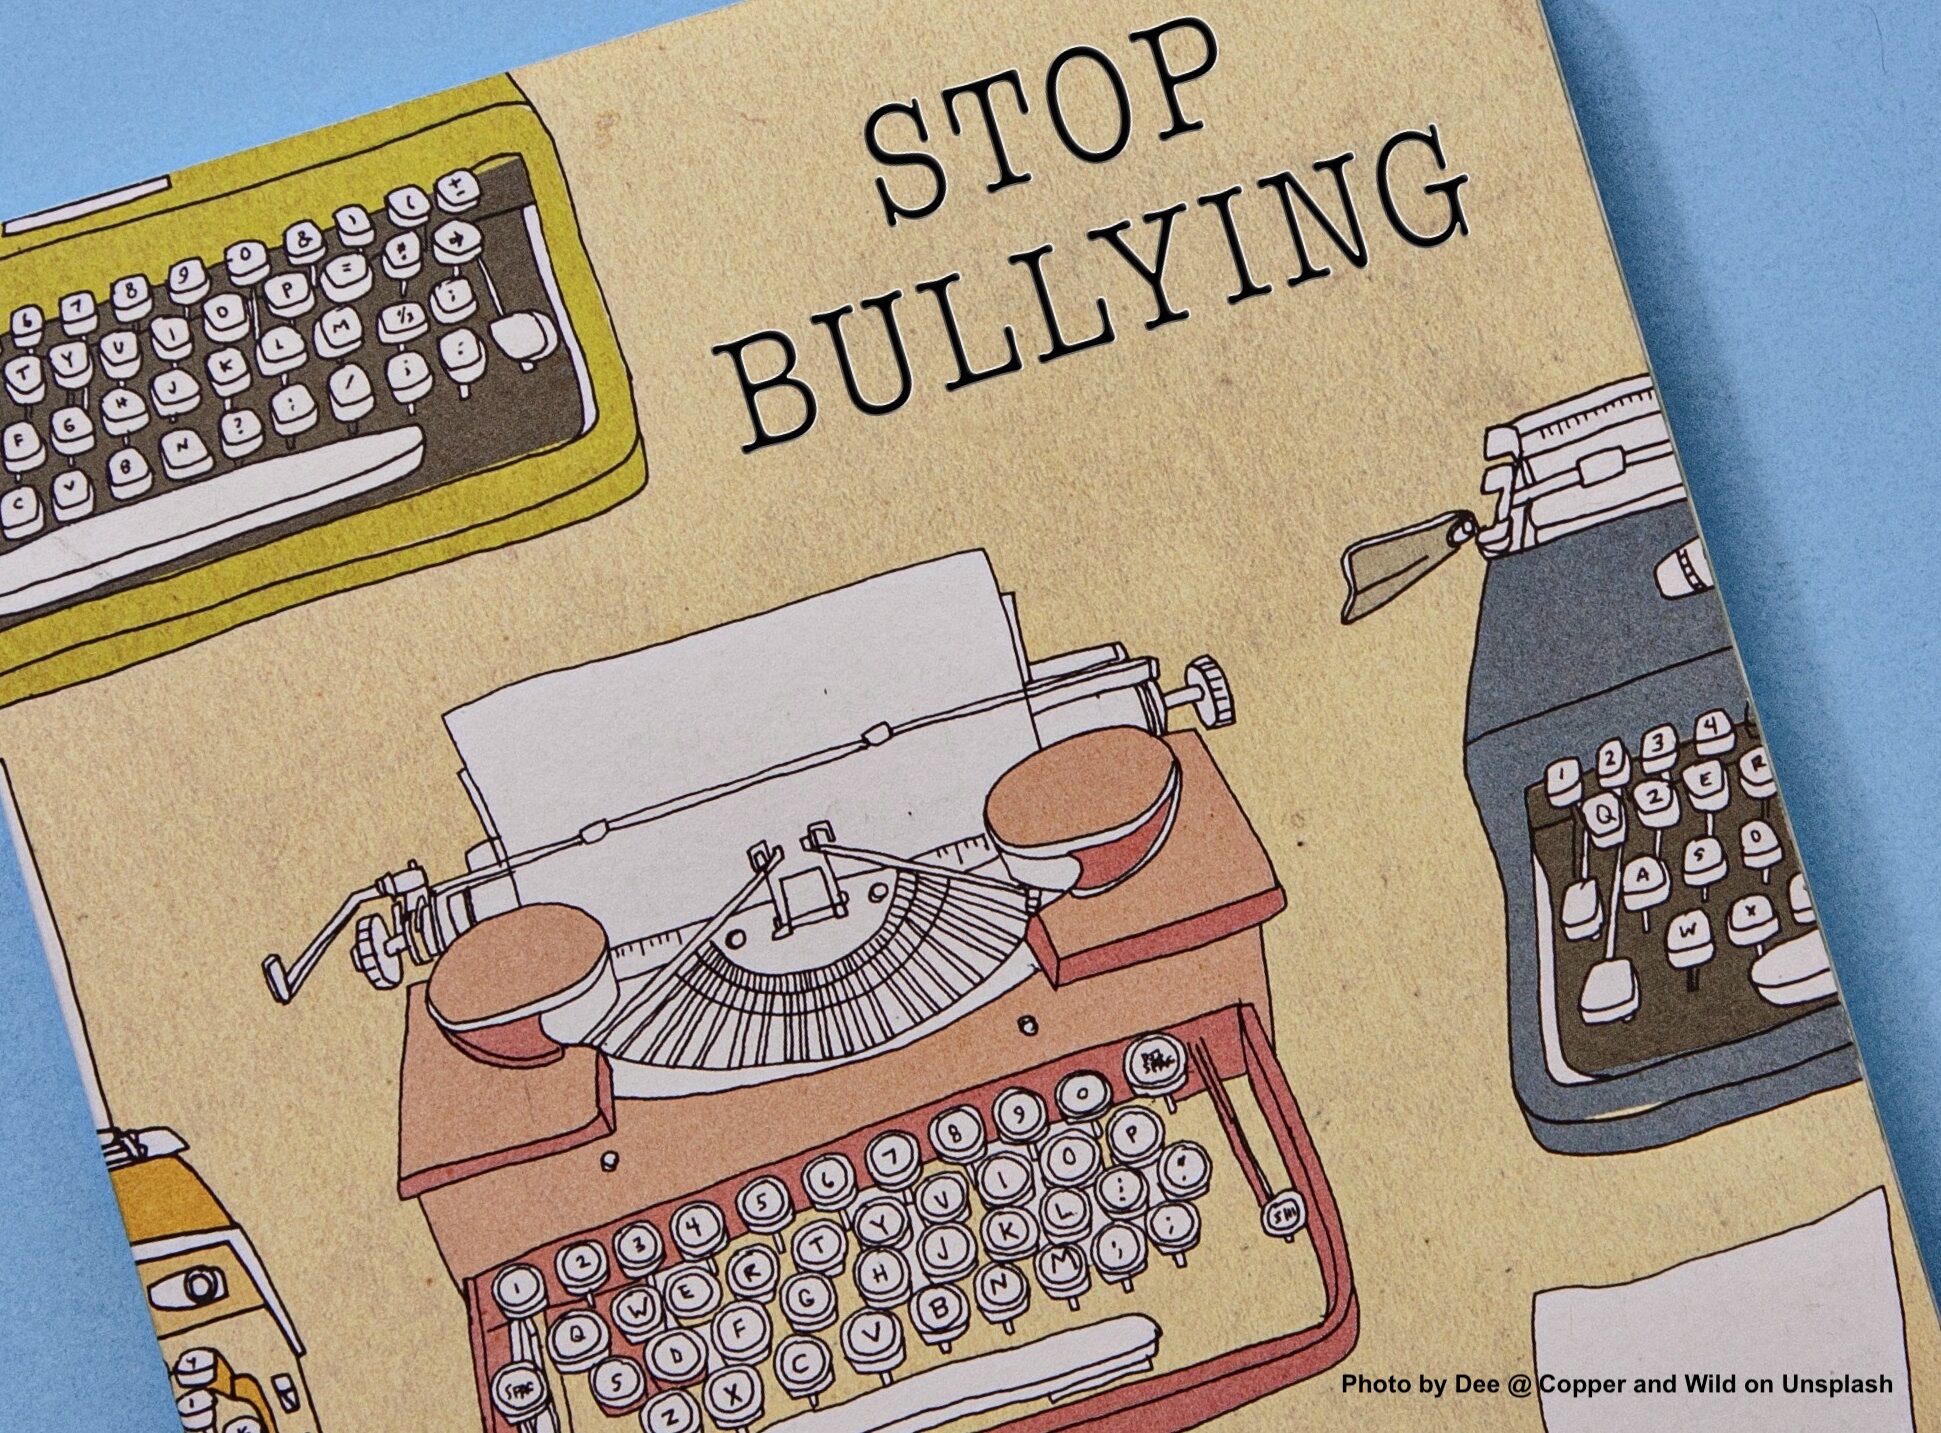 This Book is Banned_Stop Bullying: Books are a Powerful Tool